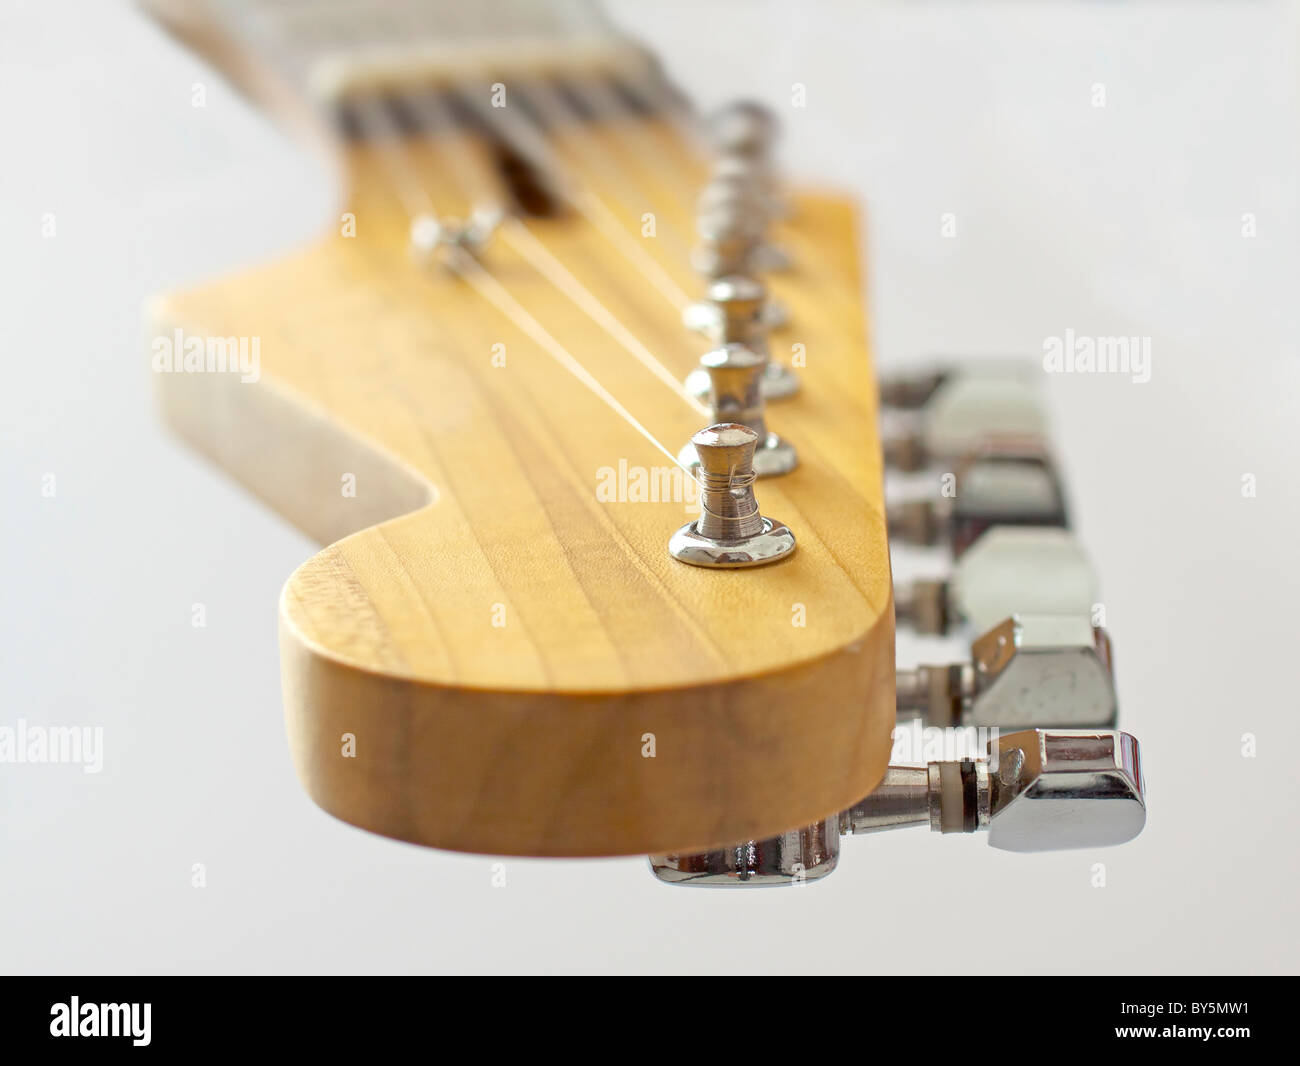 Close up of headstock of an electric guitar, over white Stock Photo